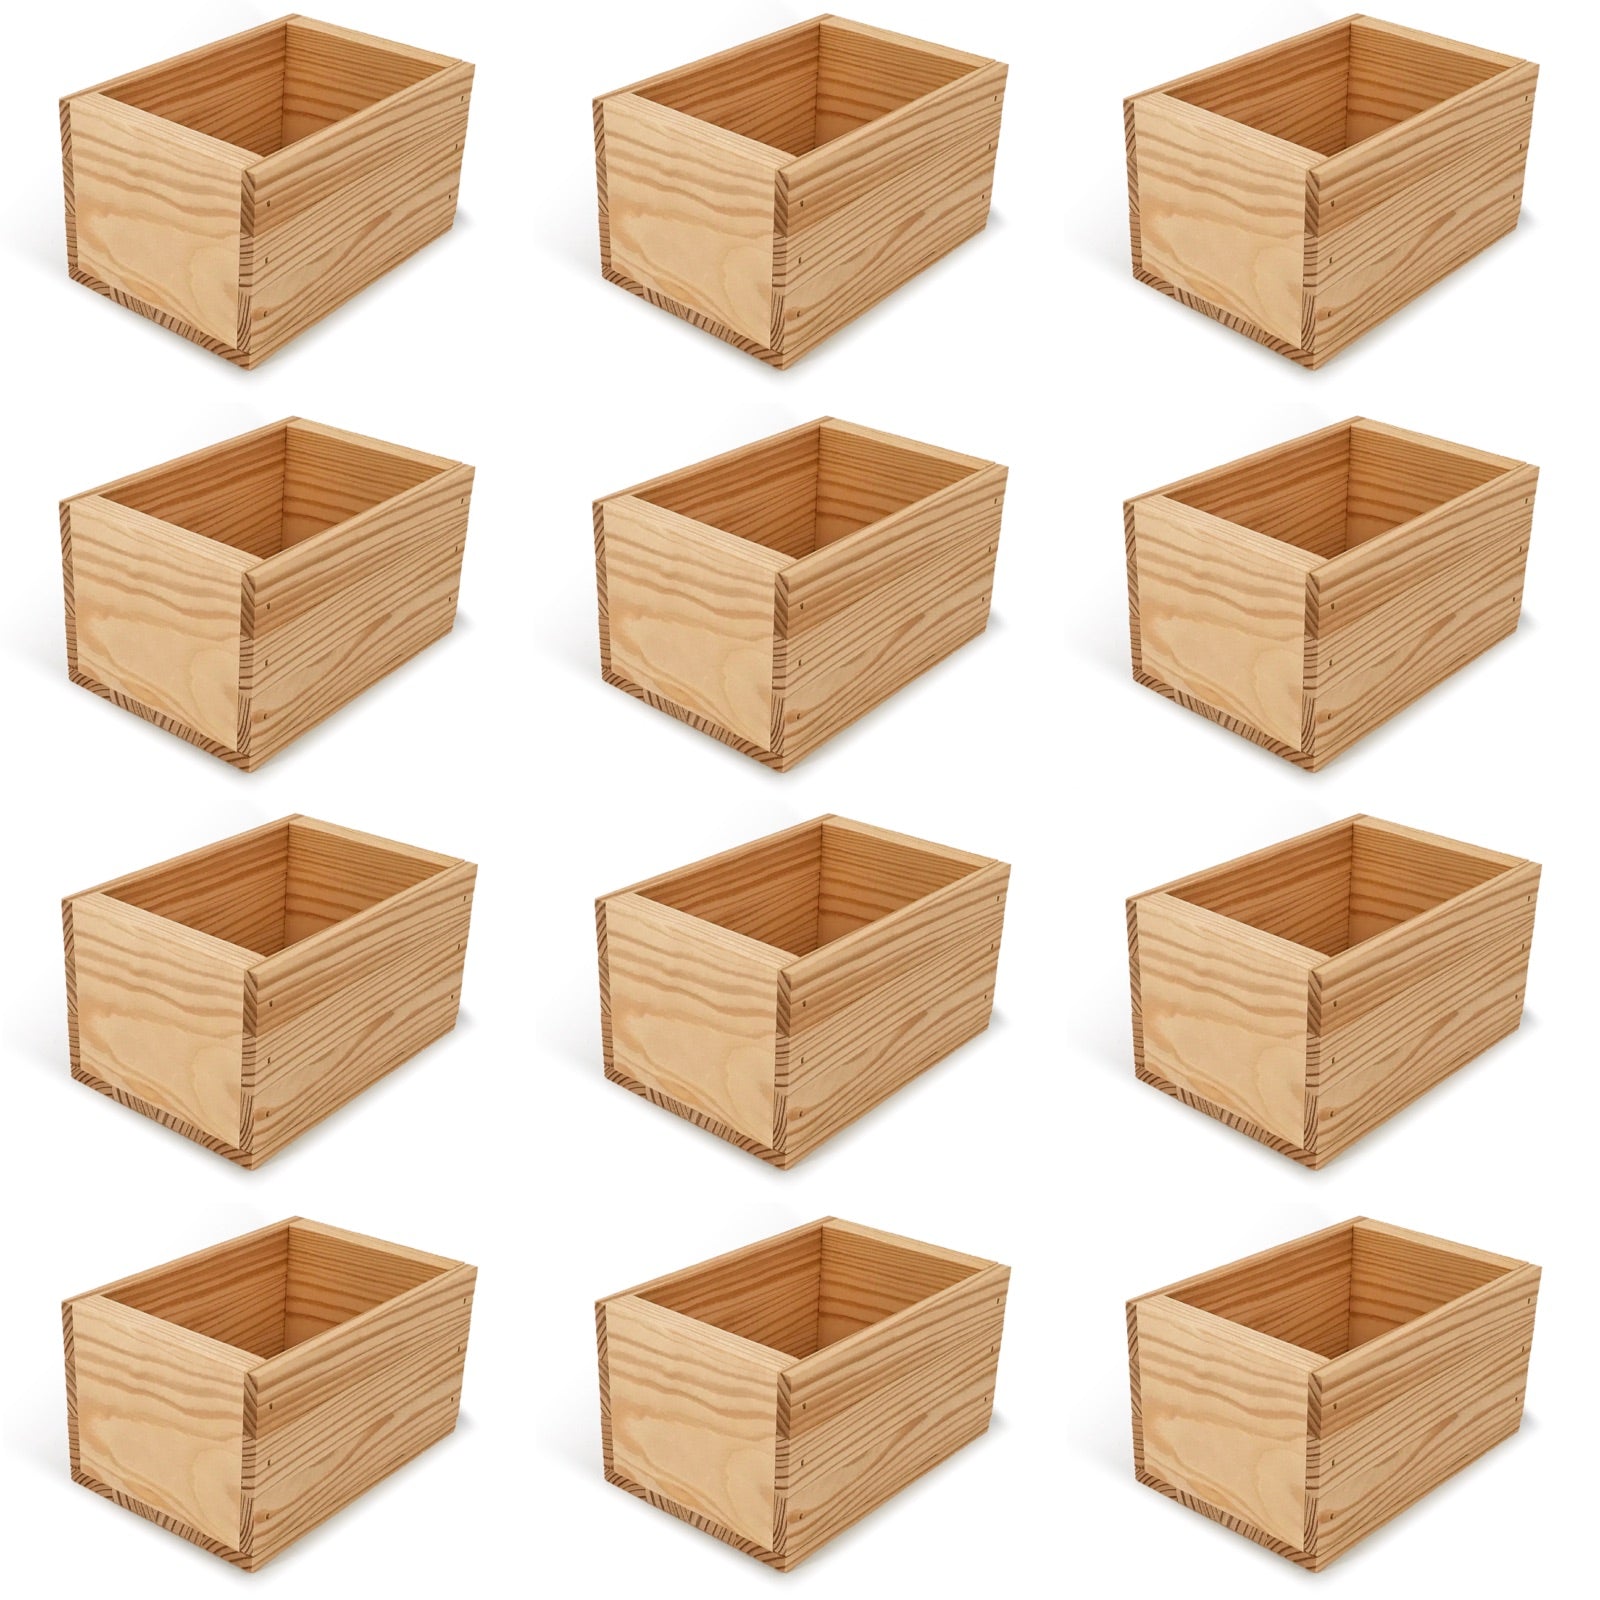 12 Small wooden crates 7x5x4.25